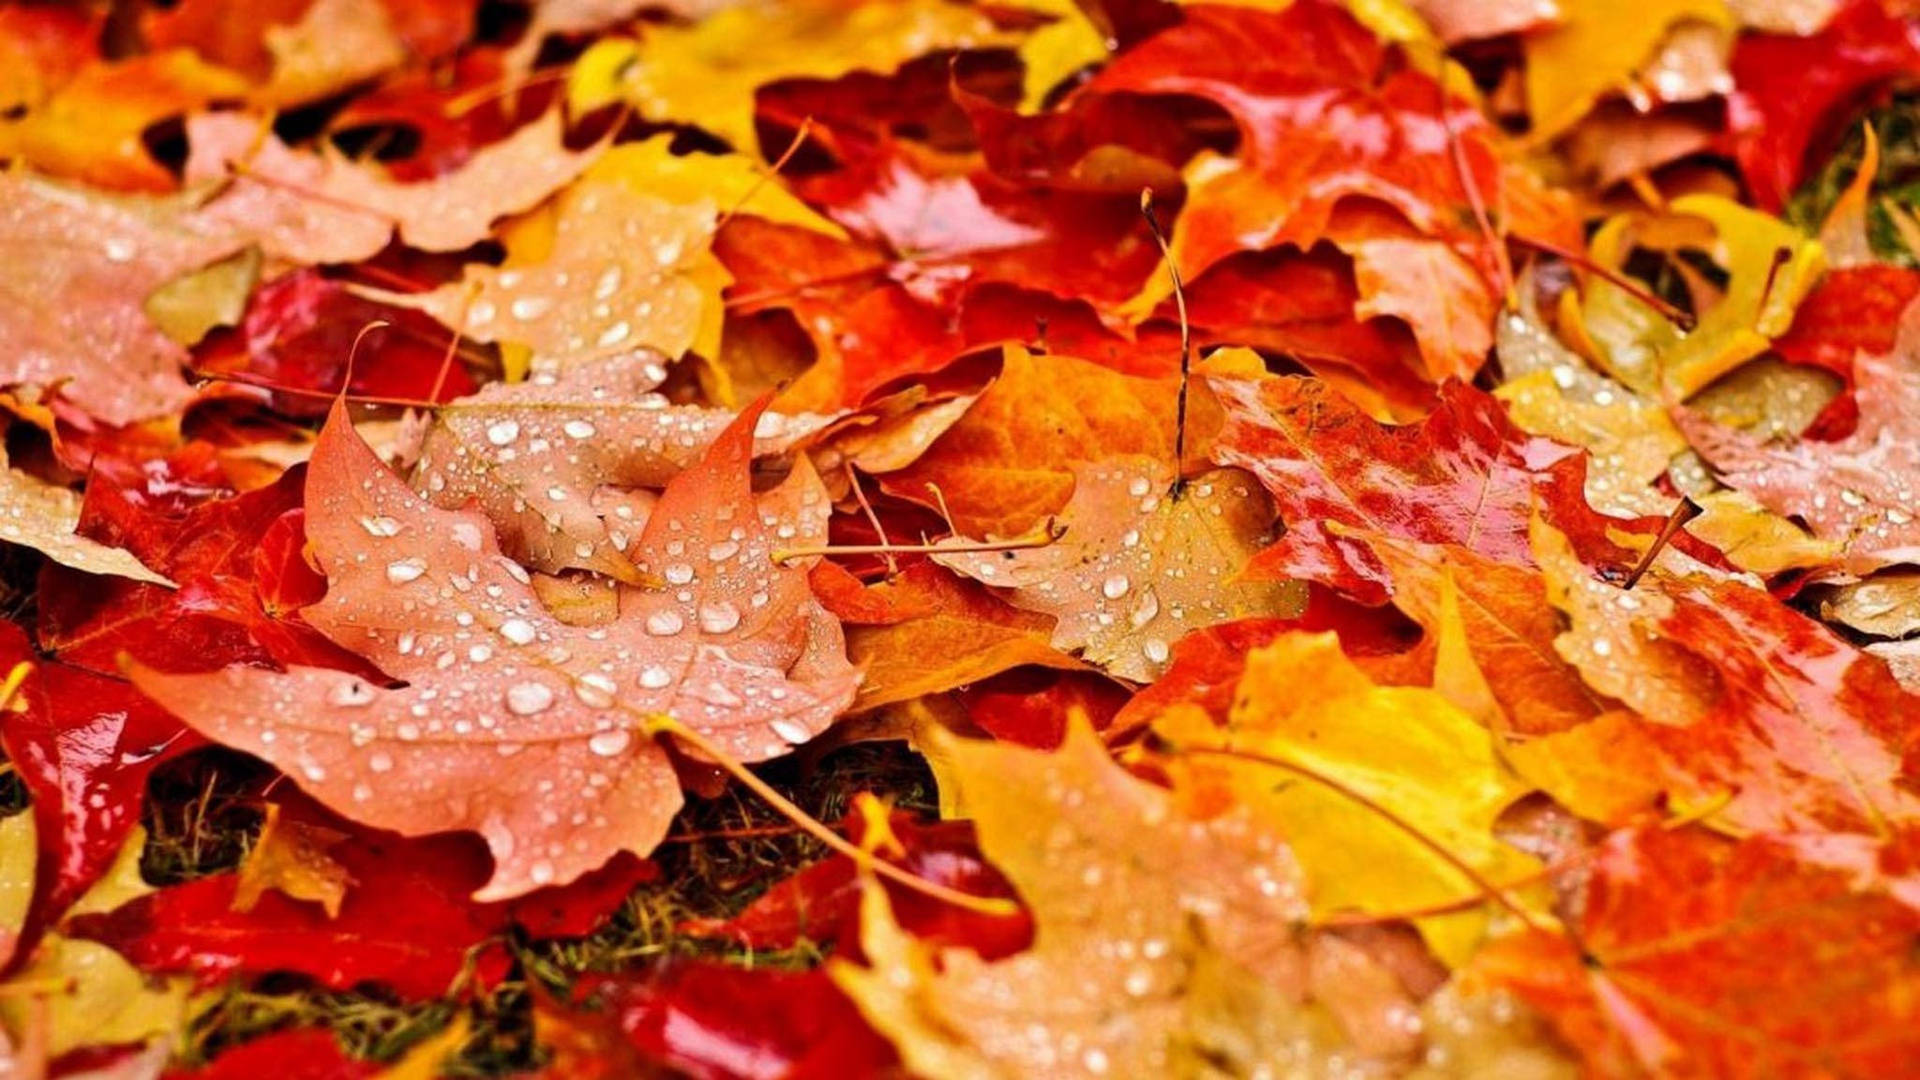 Cute Fall Aesthetic Leaves With Raindrops Wallpaper